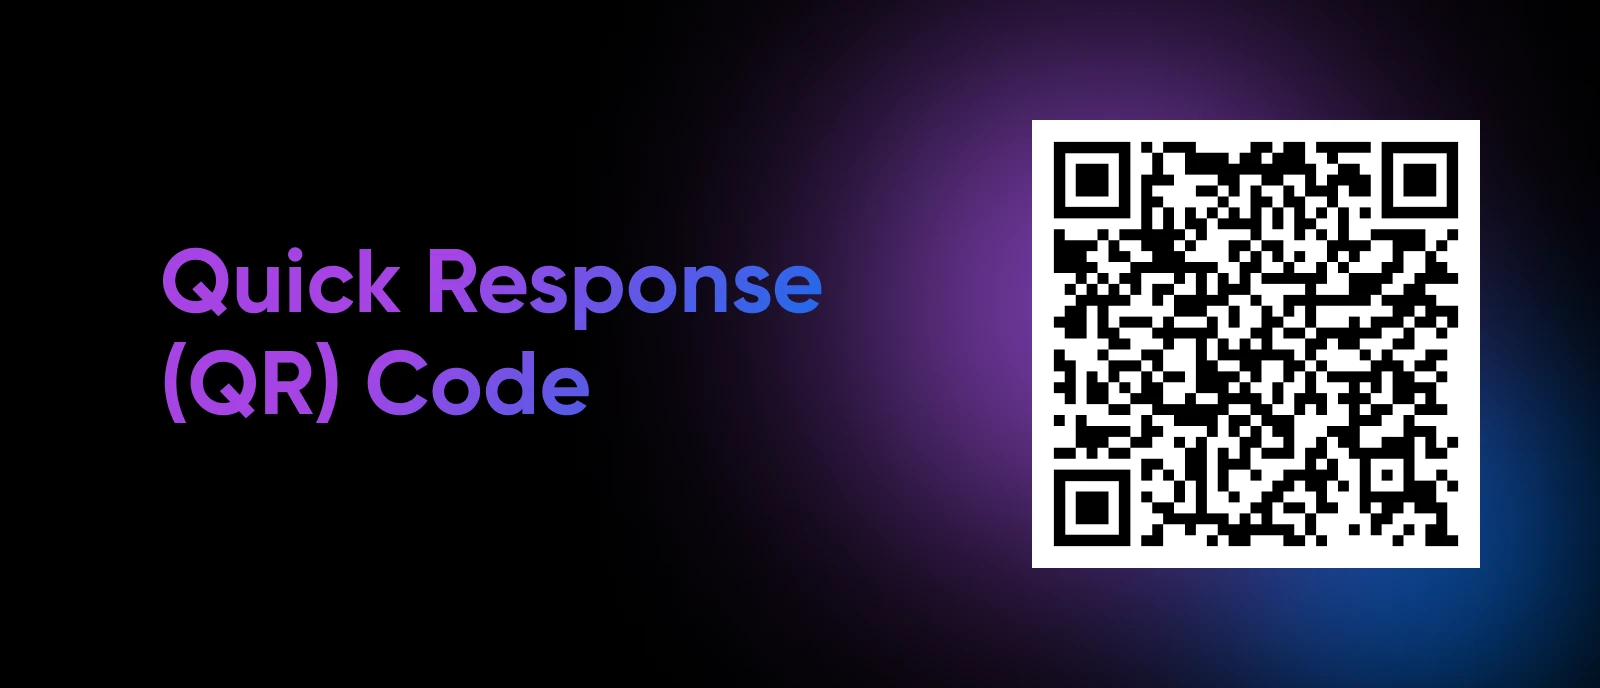 A QR Code example is shown against a dark background